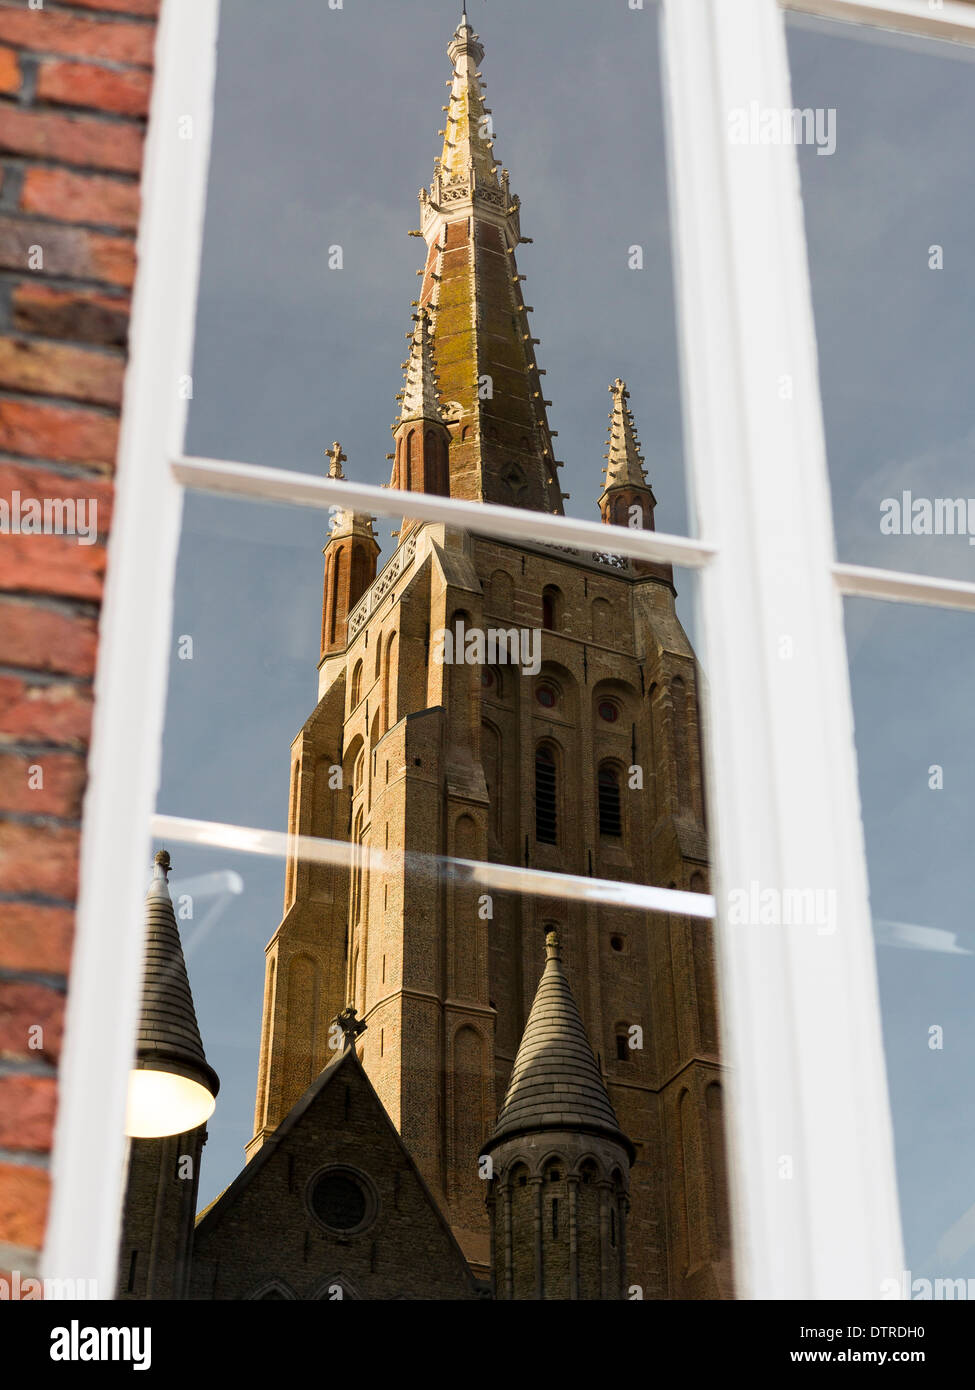 Reflection in window of the tower of Spire of Church of our Lady, Bruges (Onze Lieve Vrouwekerk, Brugge) Stock Photo